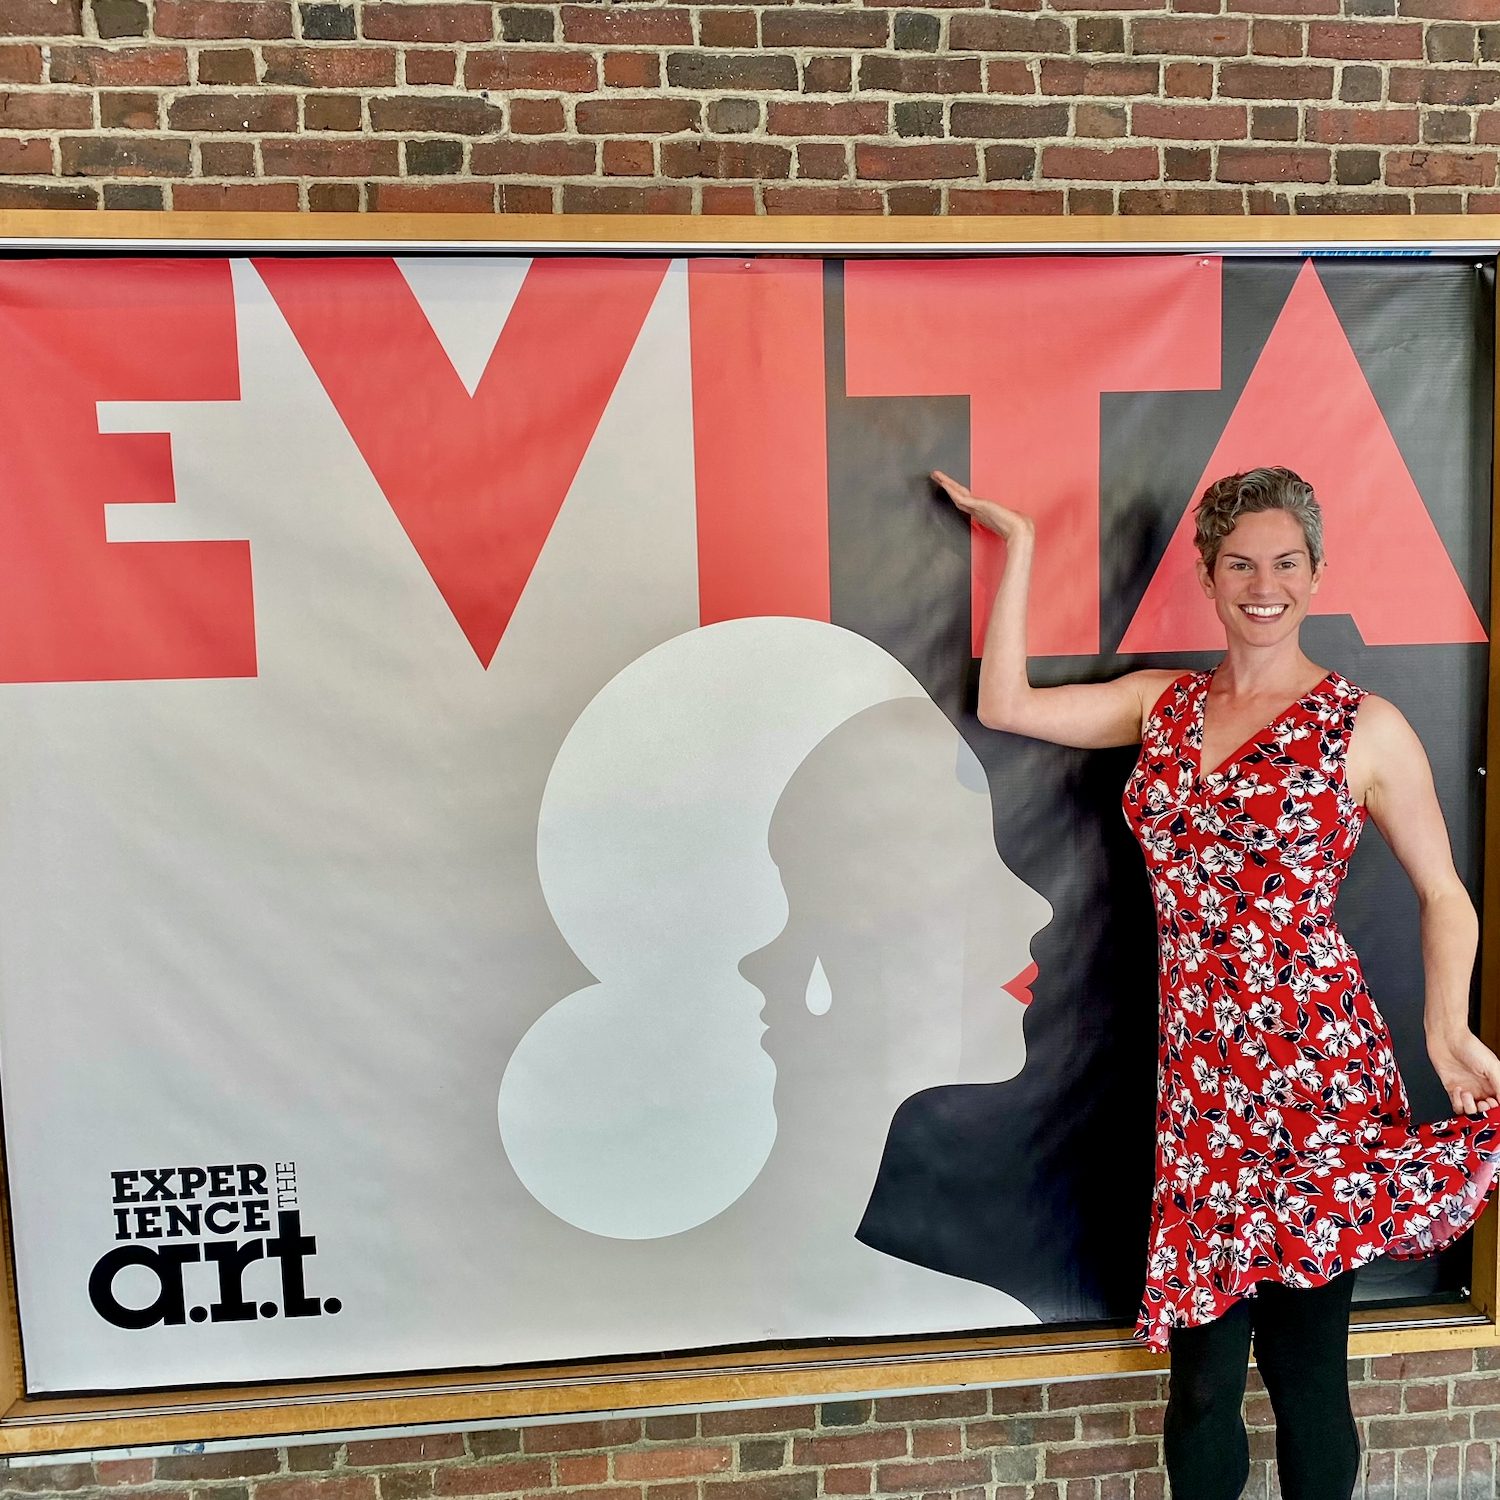 Me seeing a production of Evita in Boston.